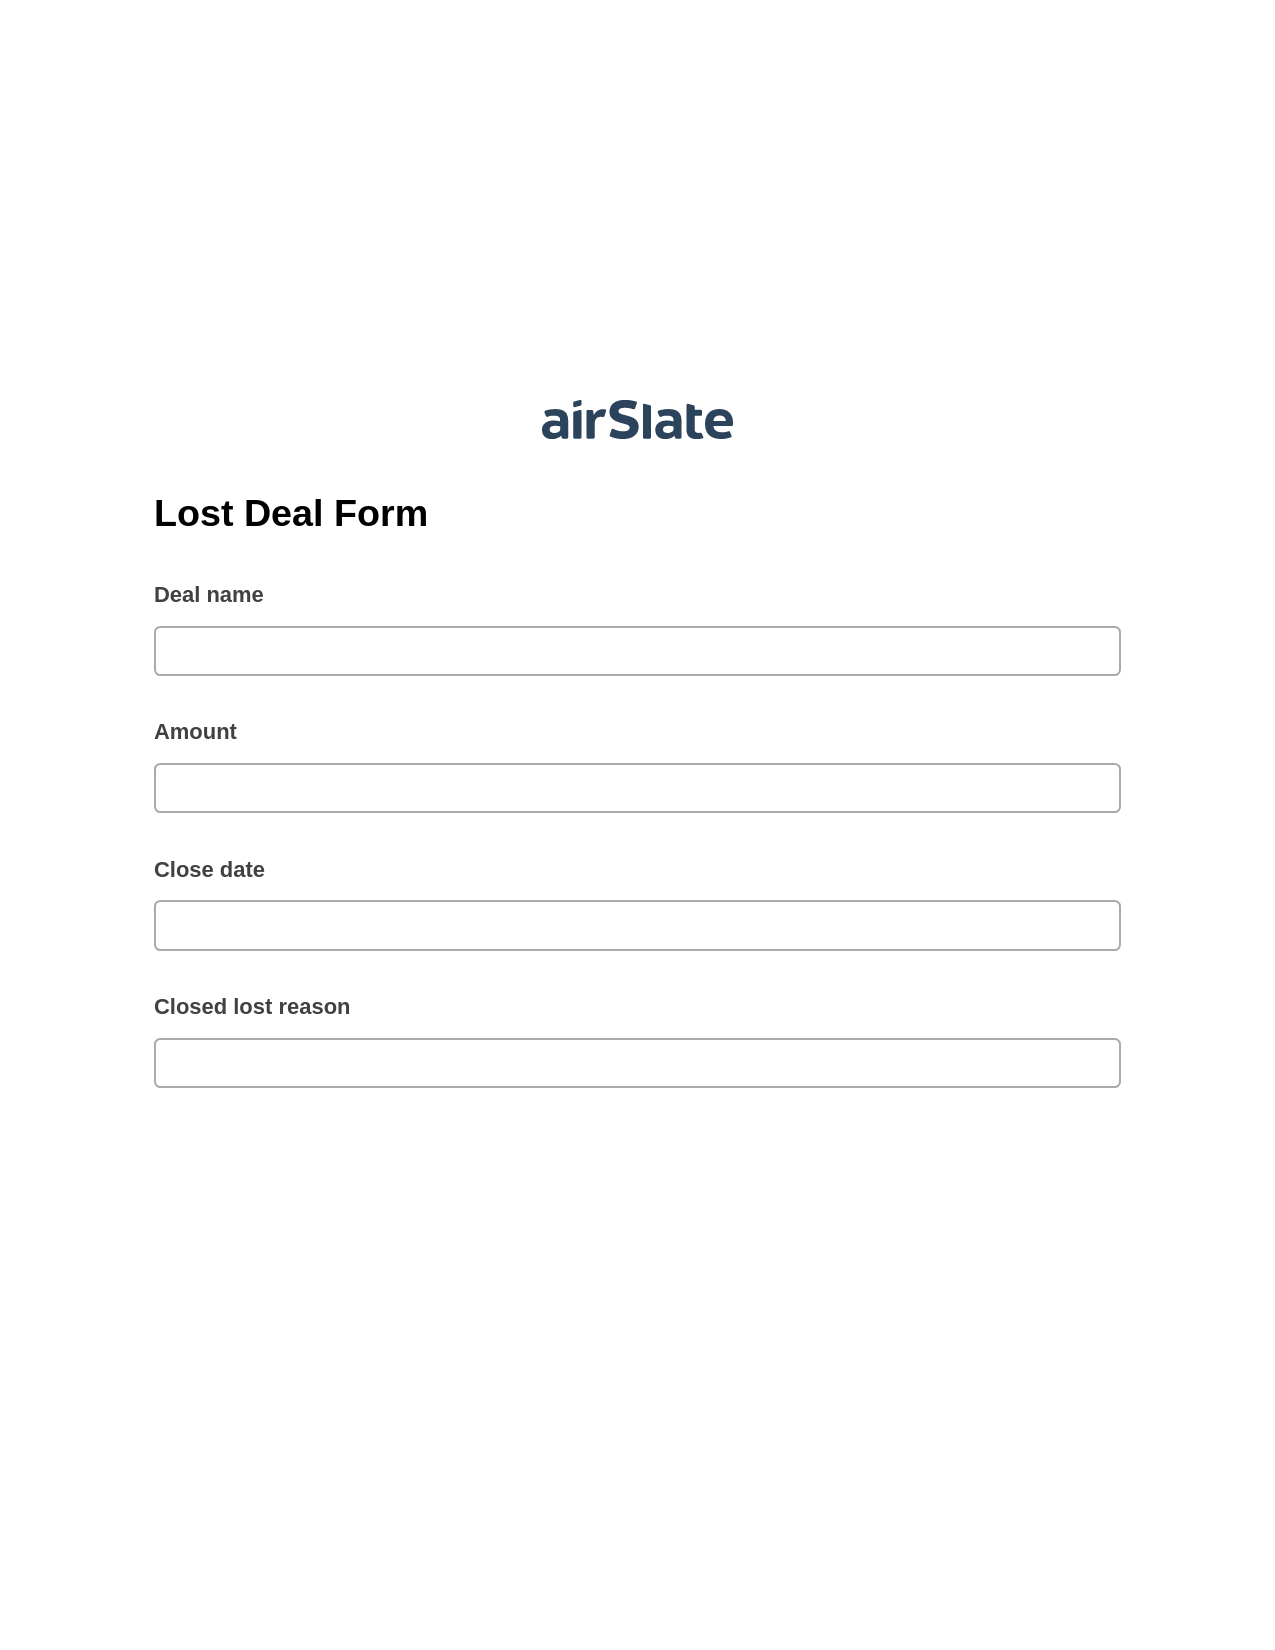 Lost Deal Form Pre-fill from another Slate Bot, Add Tags to Slate Bot, Export to Smartsheet